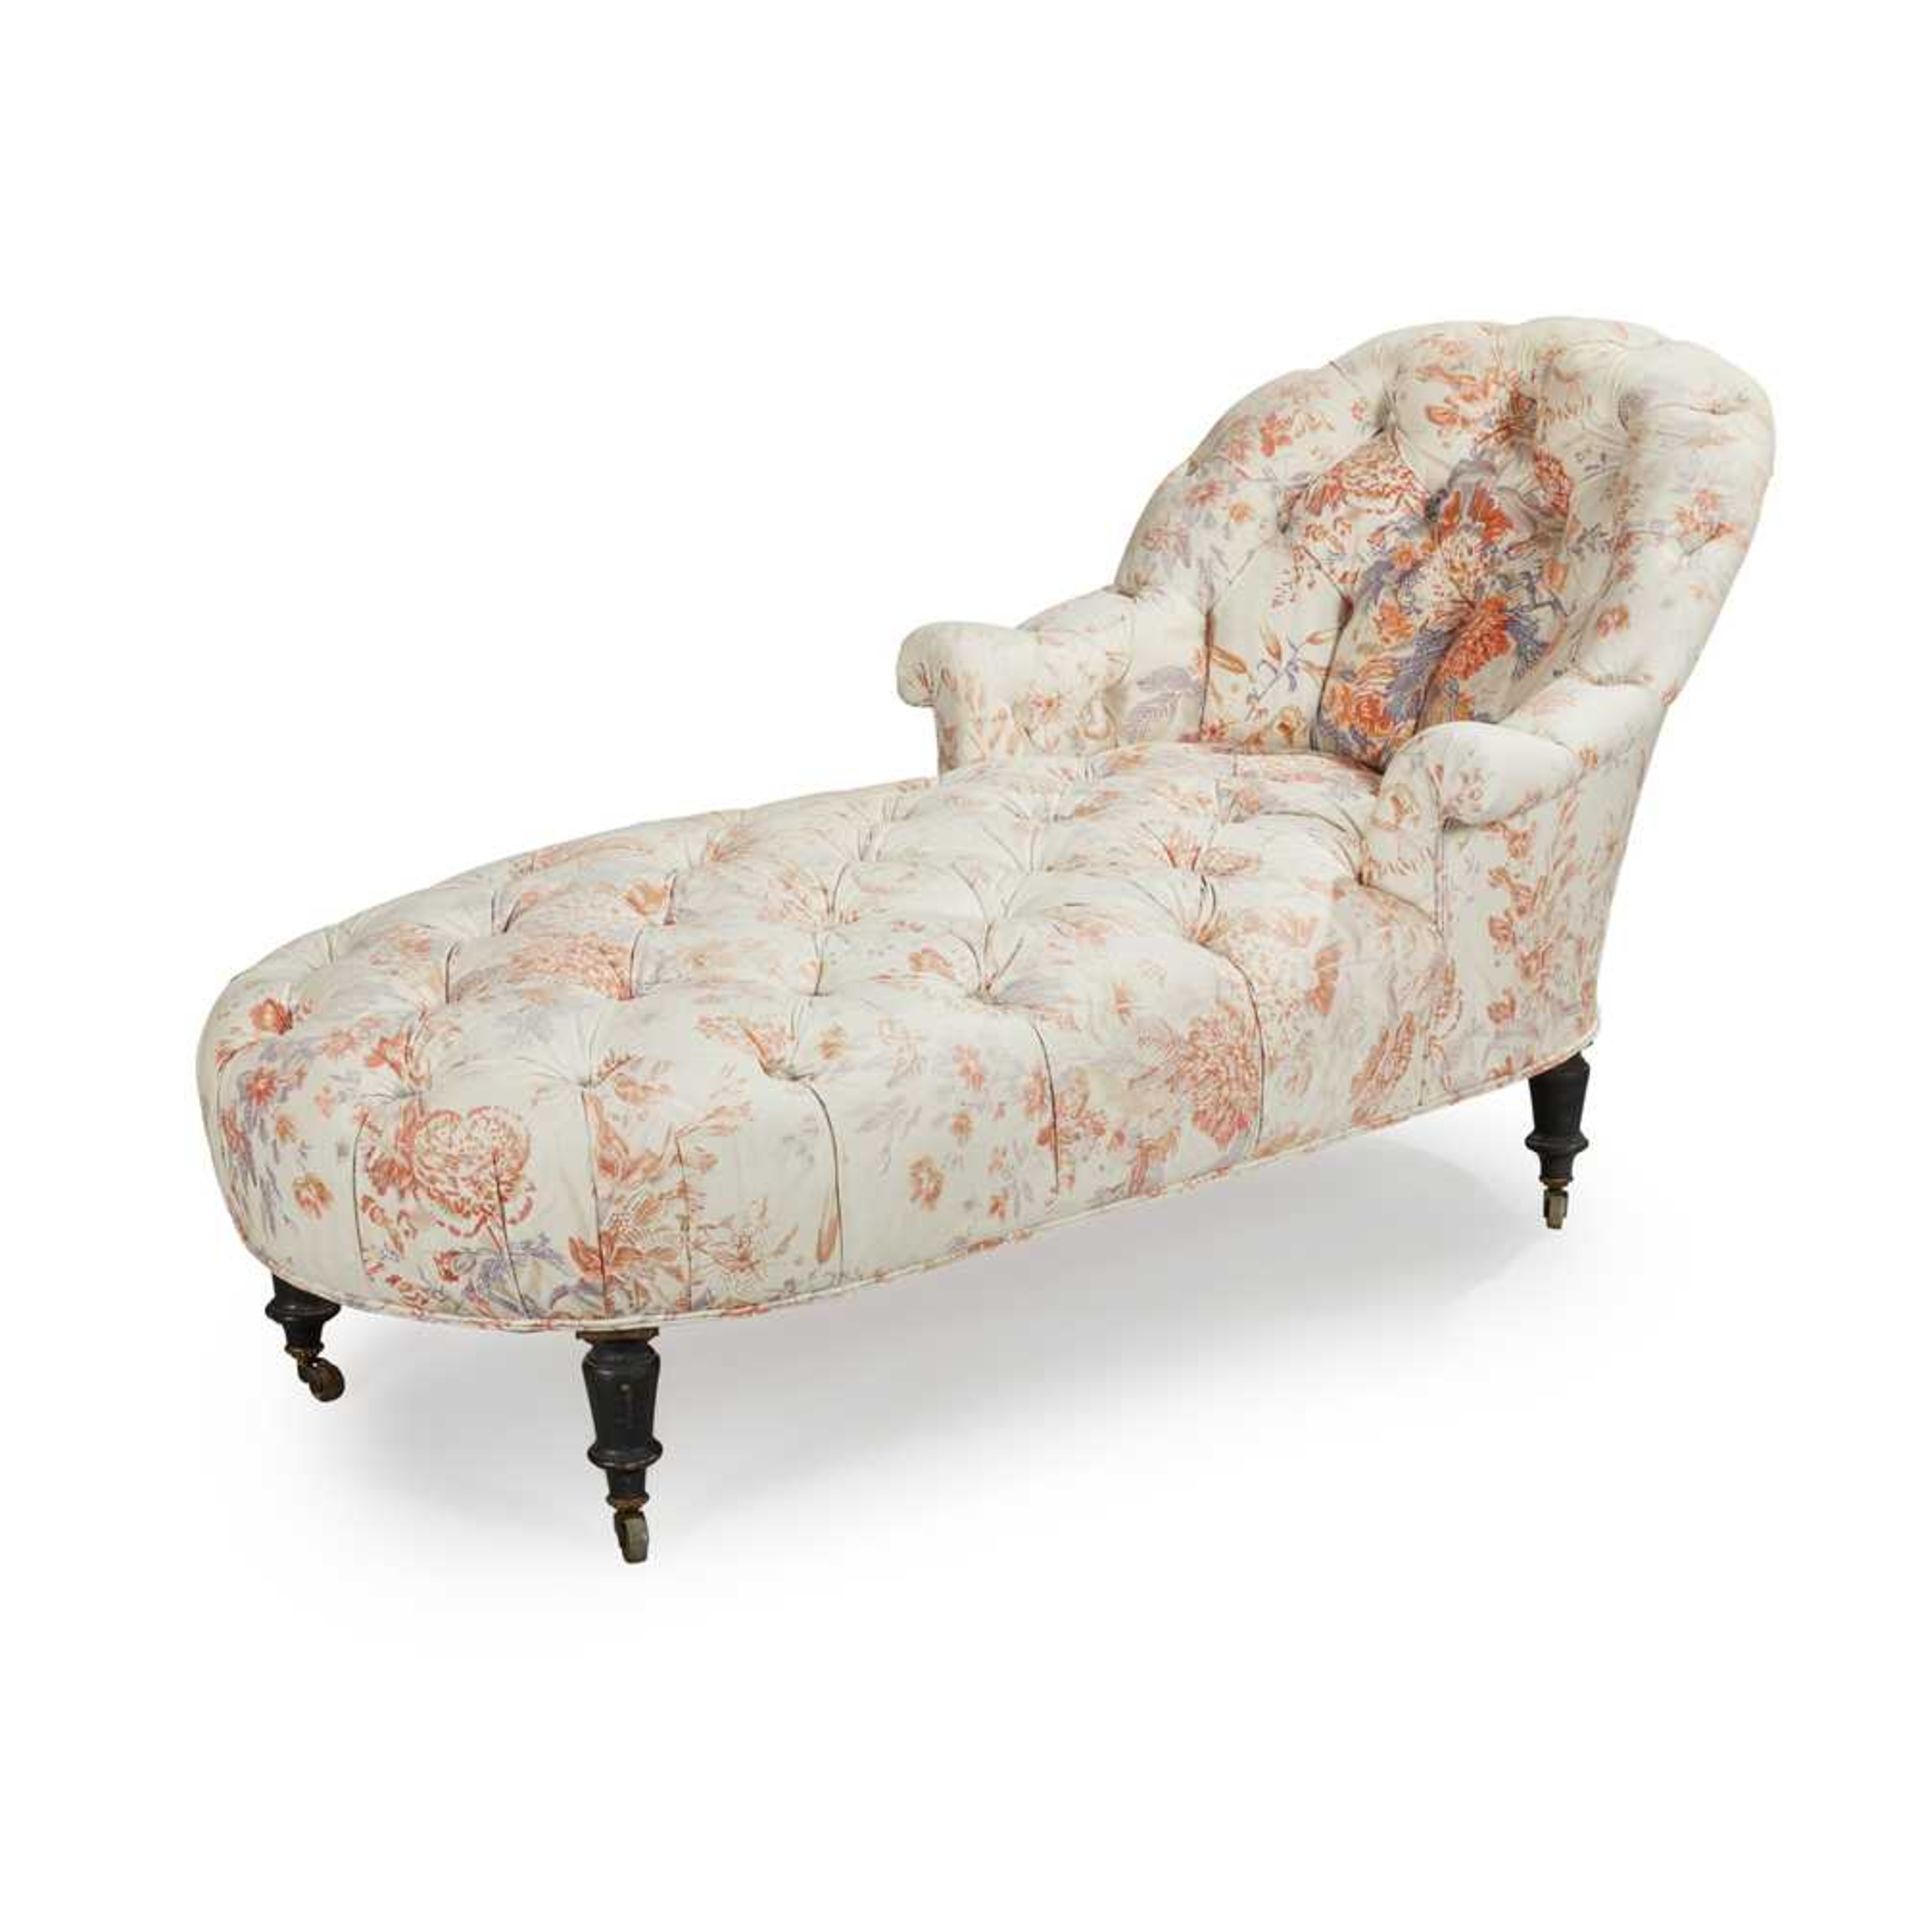 A VICTORIAN BUTTON UPHOLSTERED CHAISE LONGUE MID 19TH CENTURY